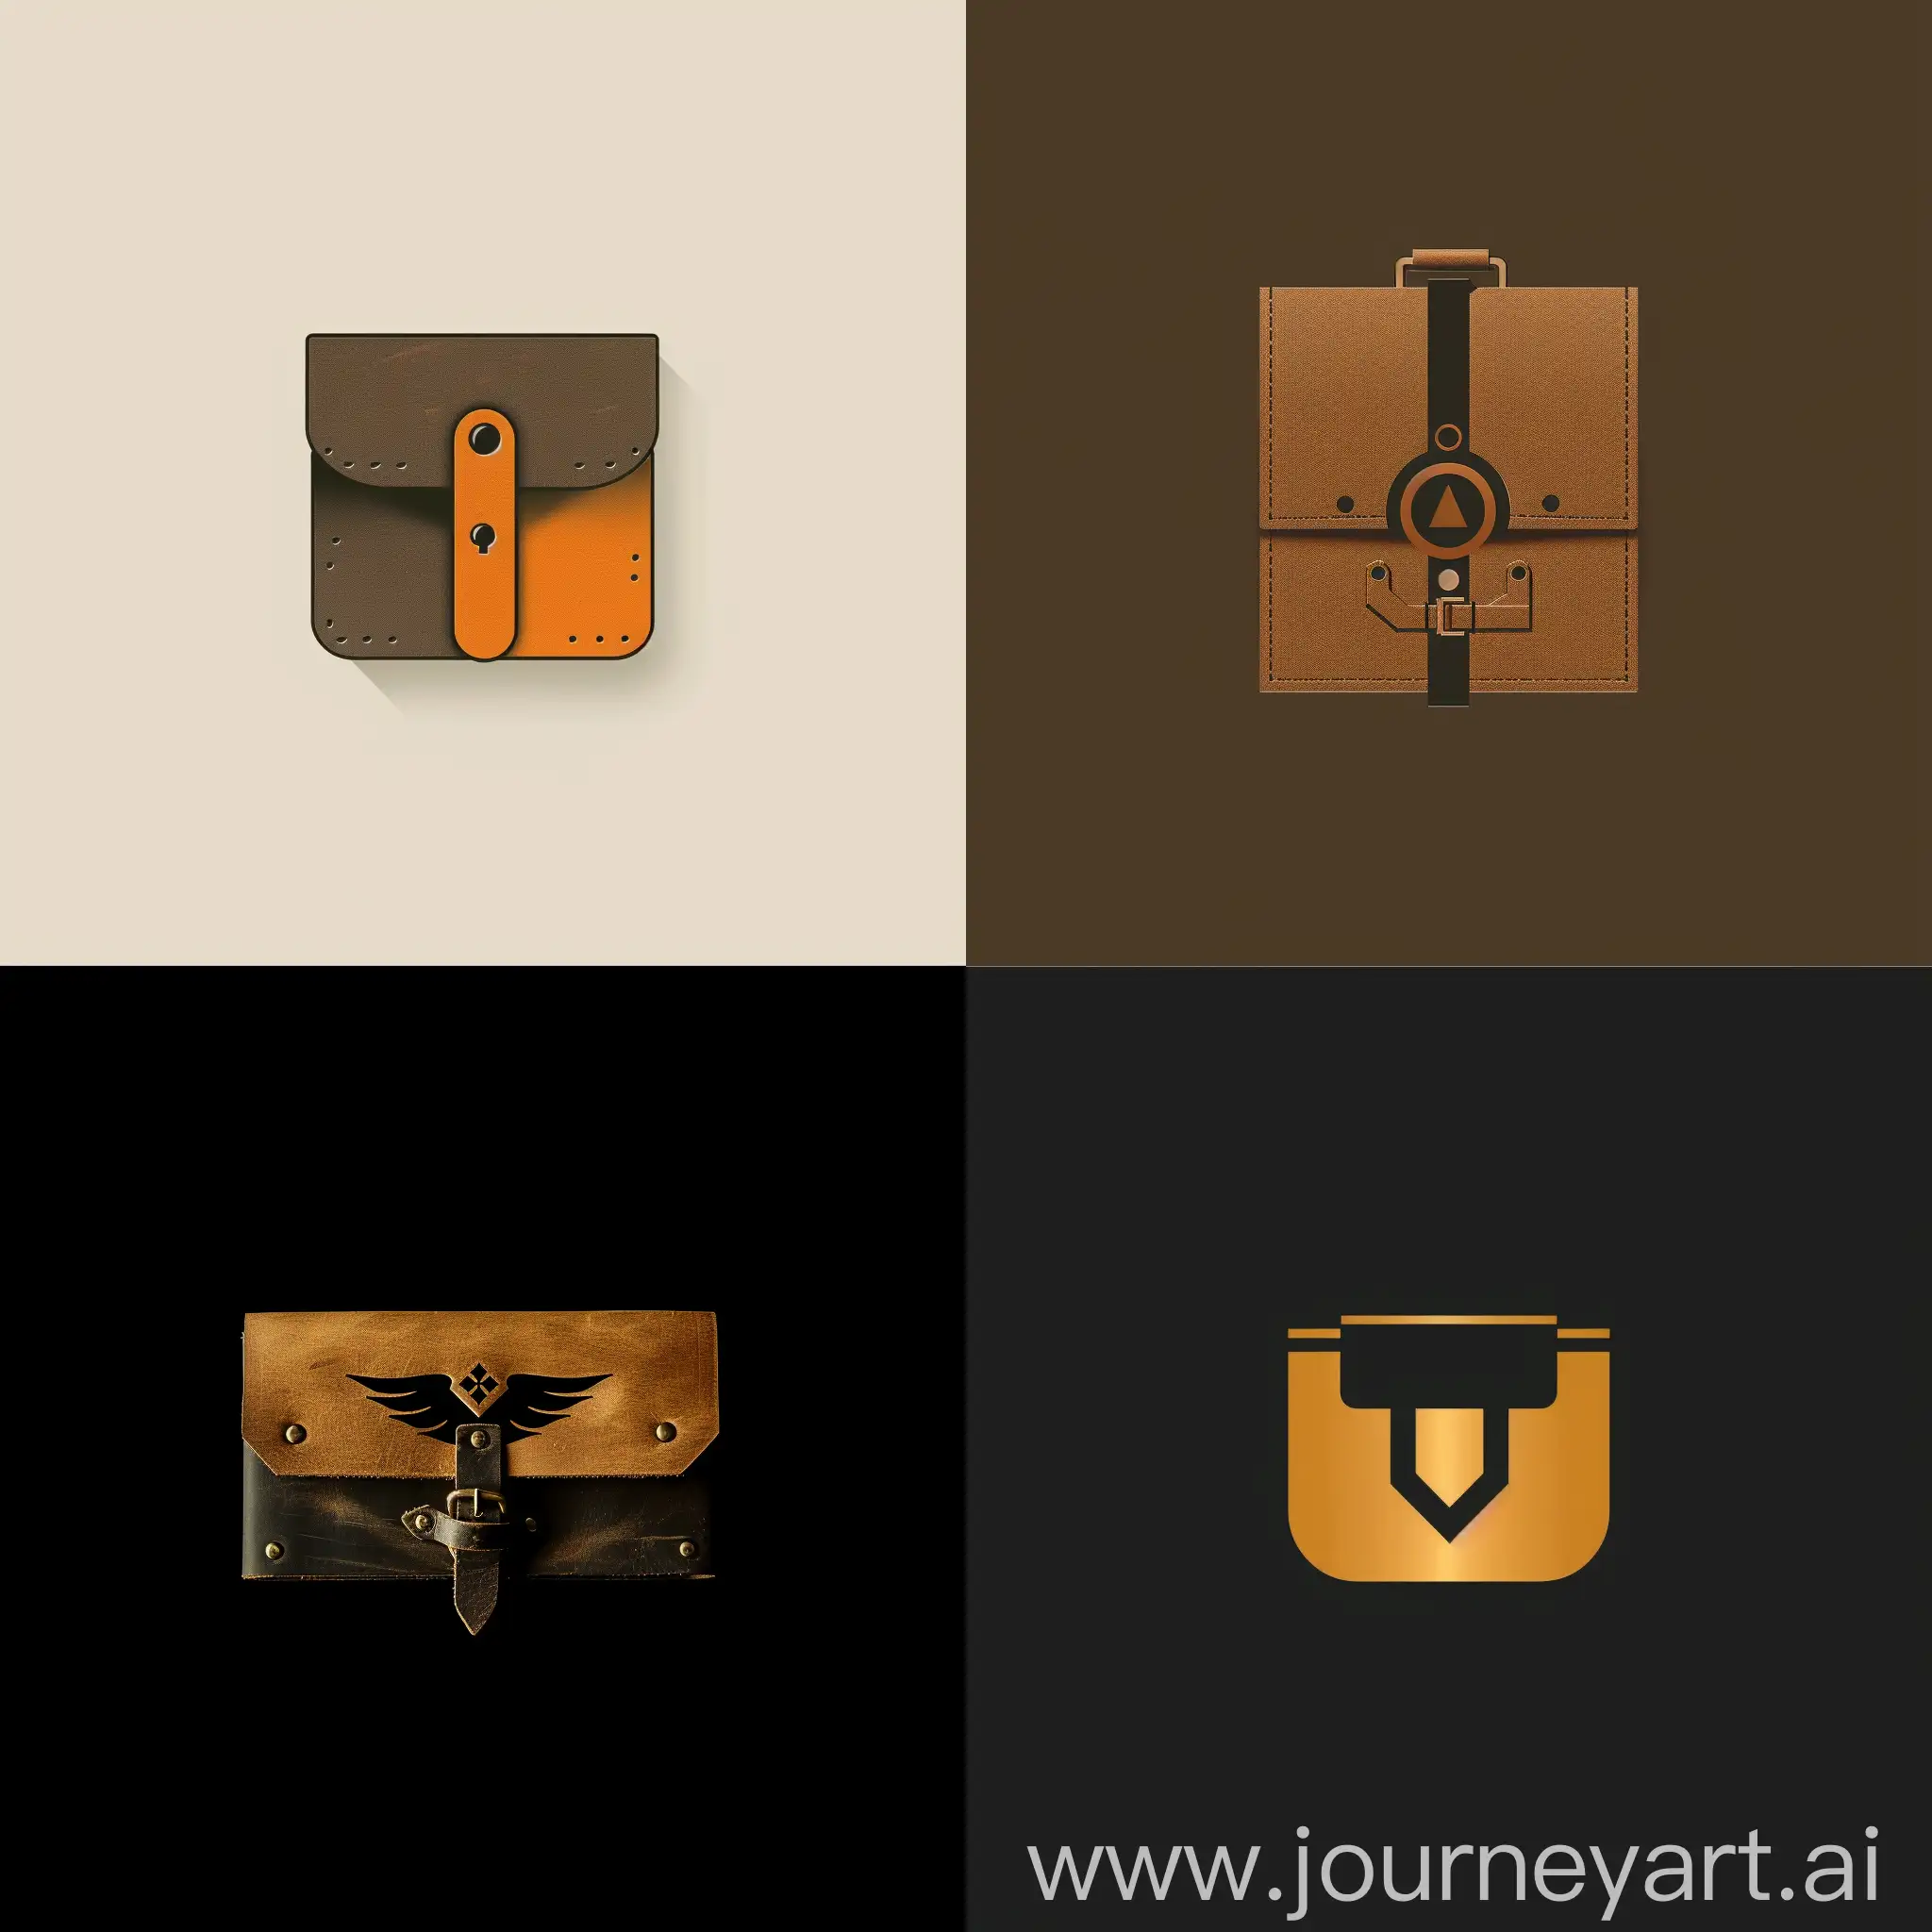 Logo for a company that produces unique handmade leather goods in street style.